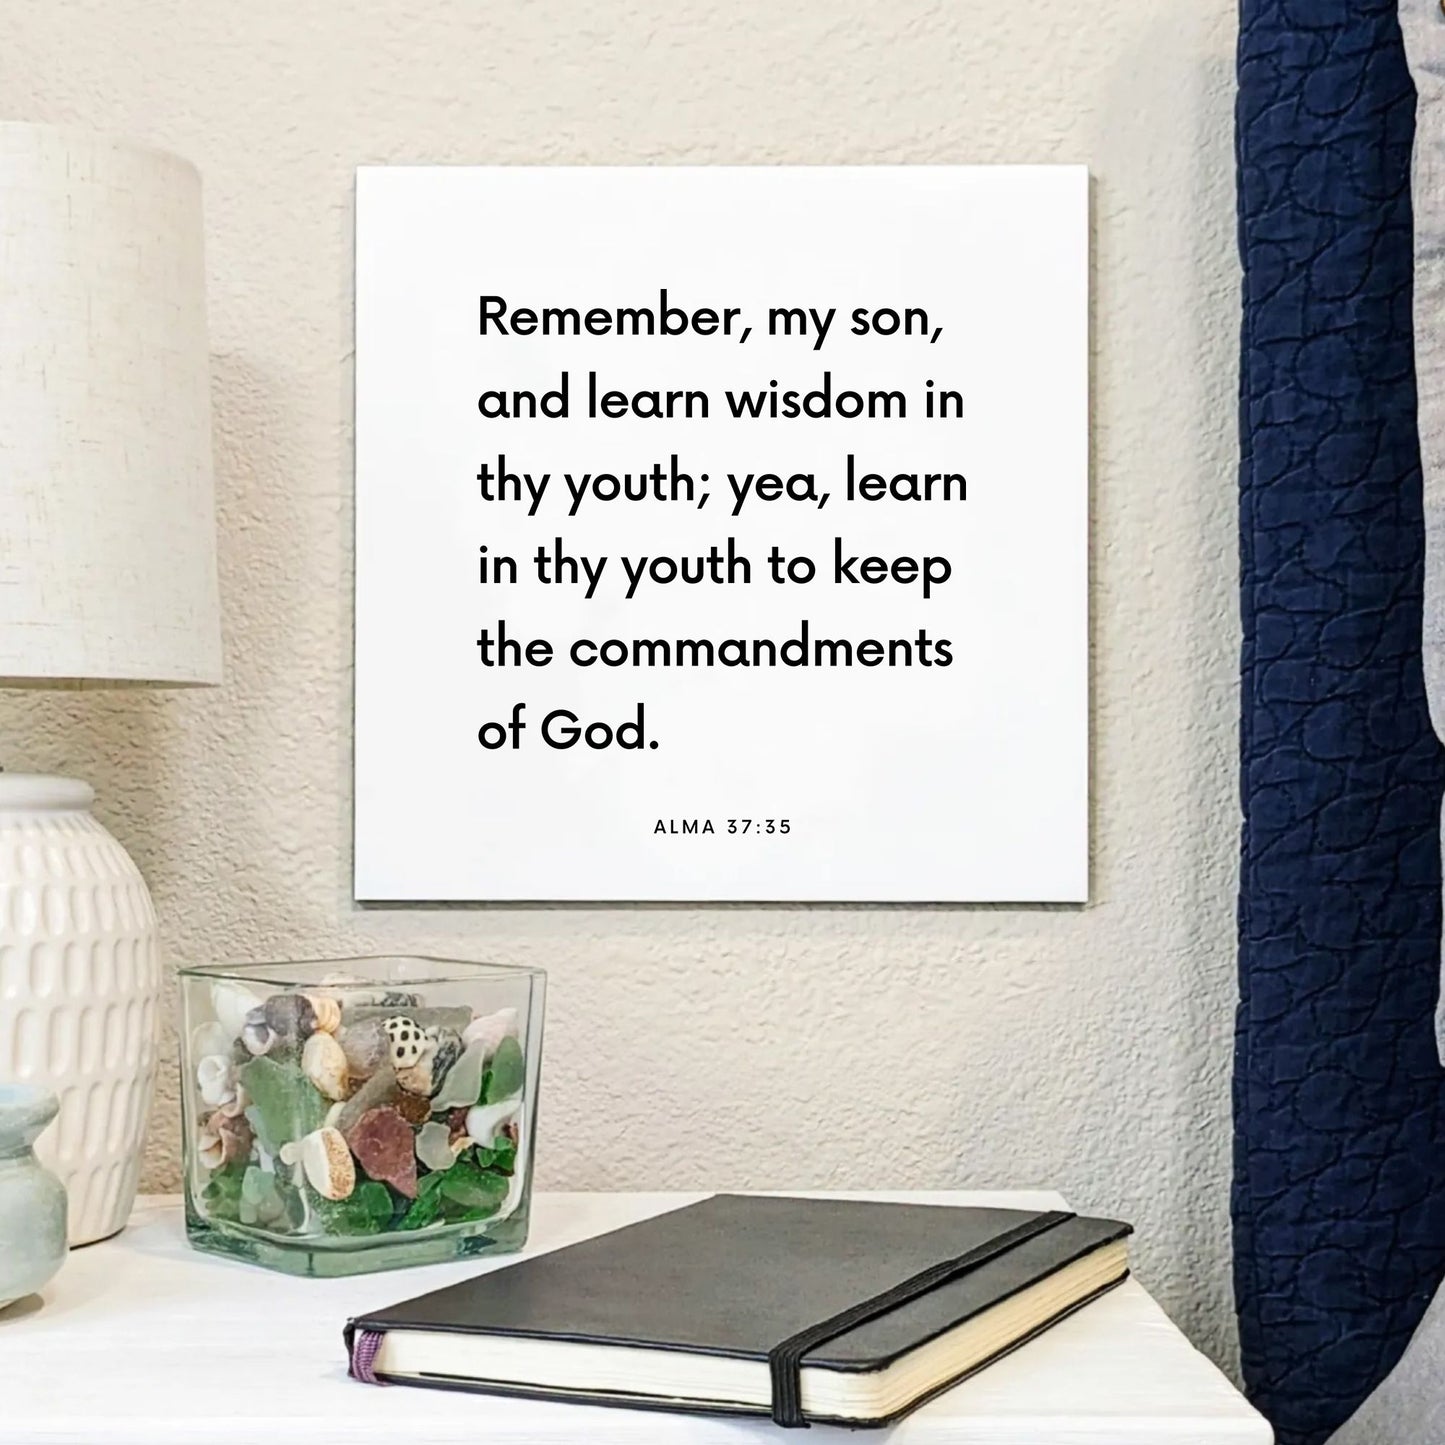 Bedside mouting of the scripture tile for Alma 37:35 - "Remember, my son, and learn wisdom in thy youth"